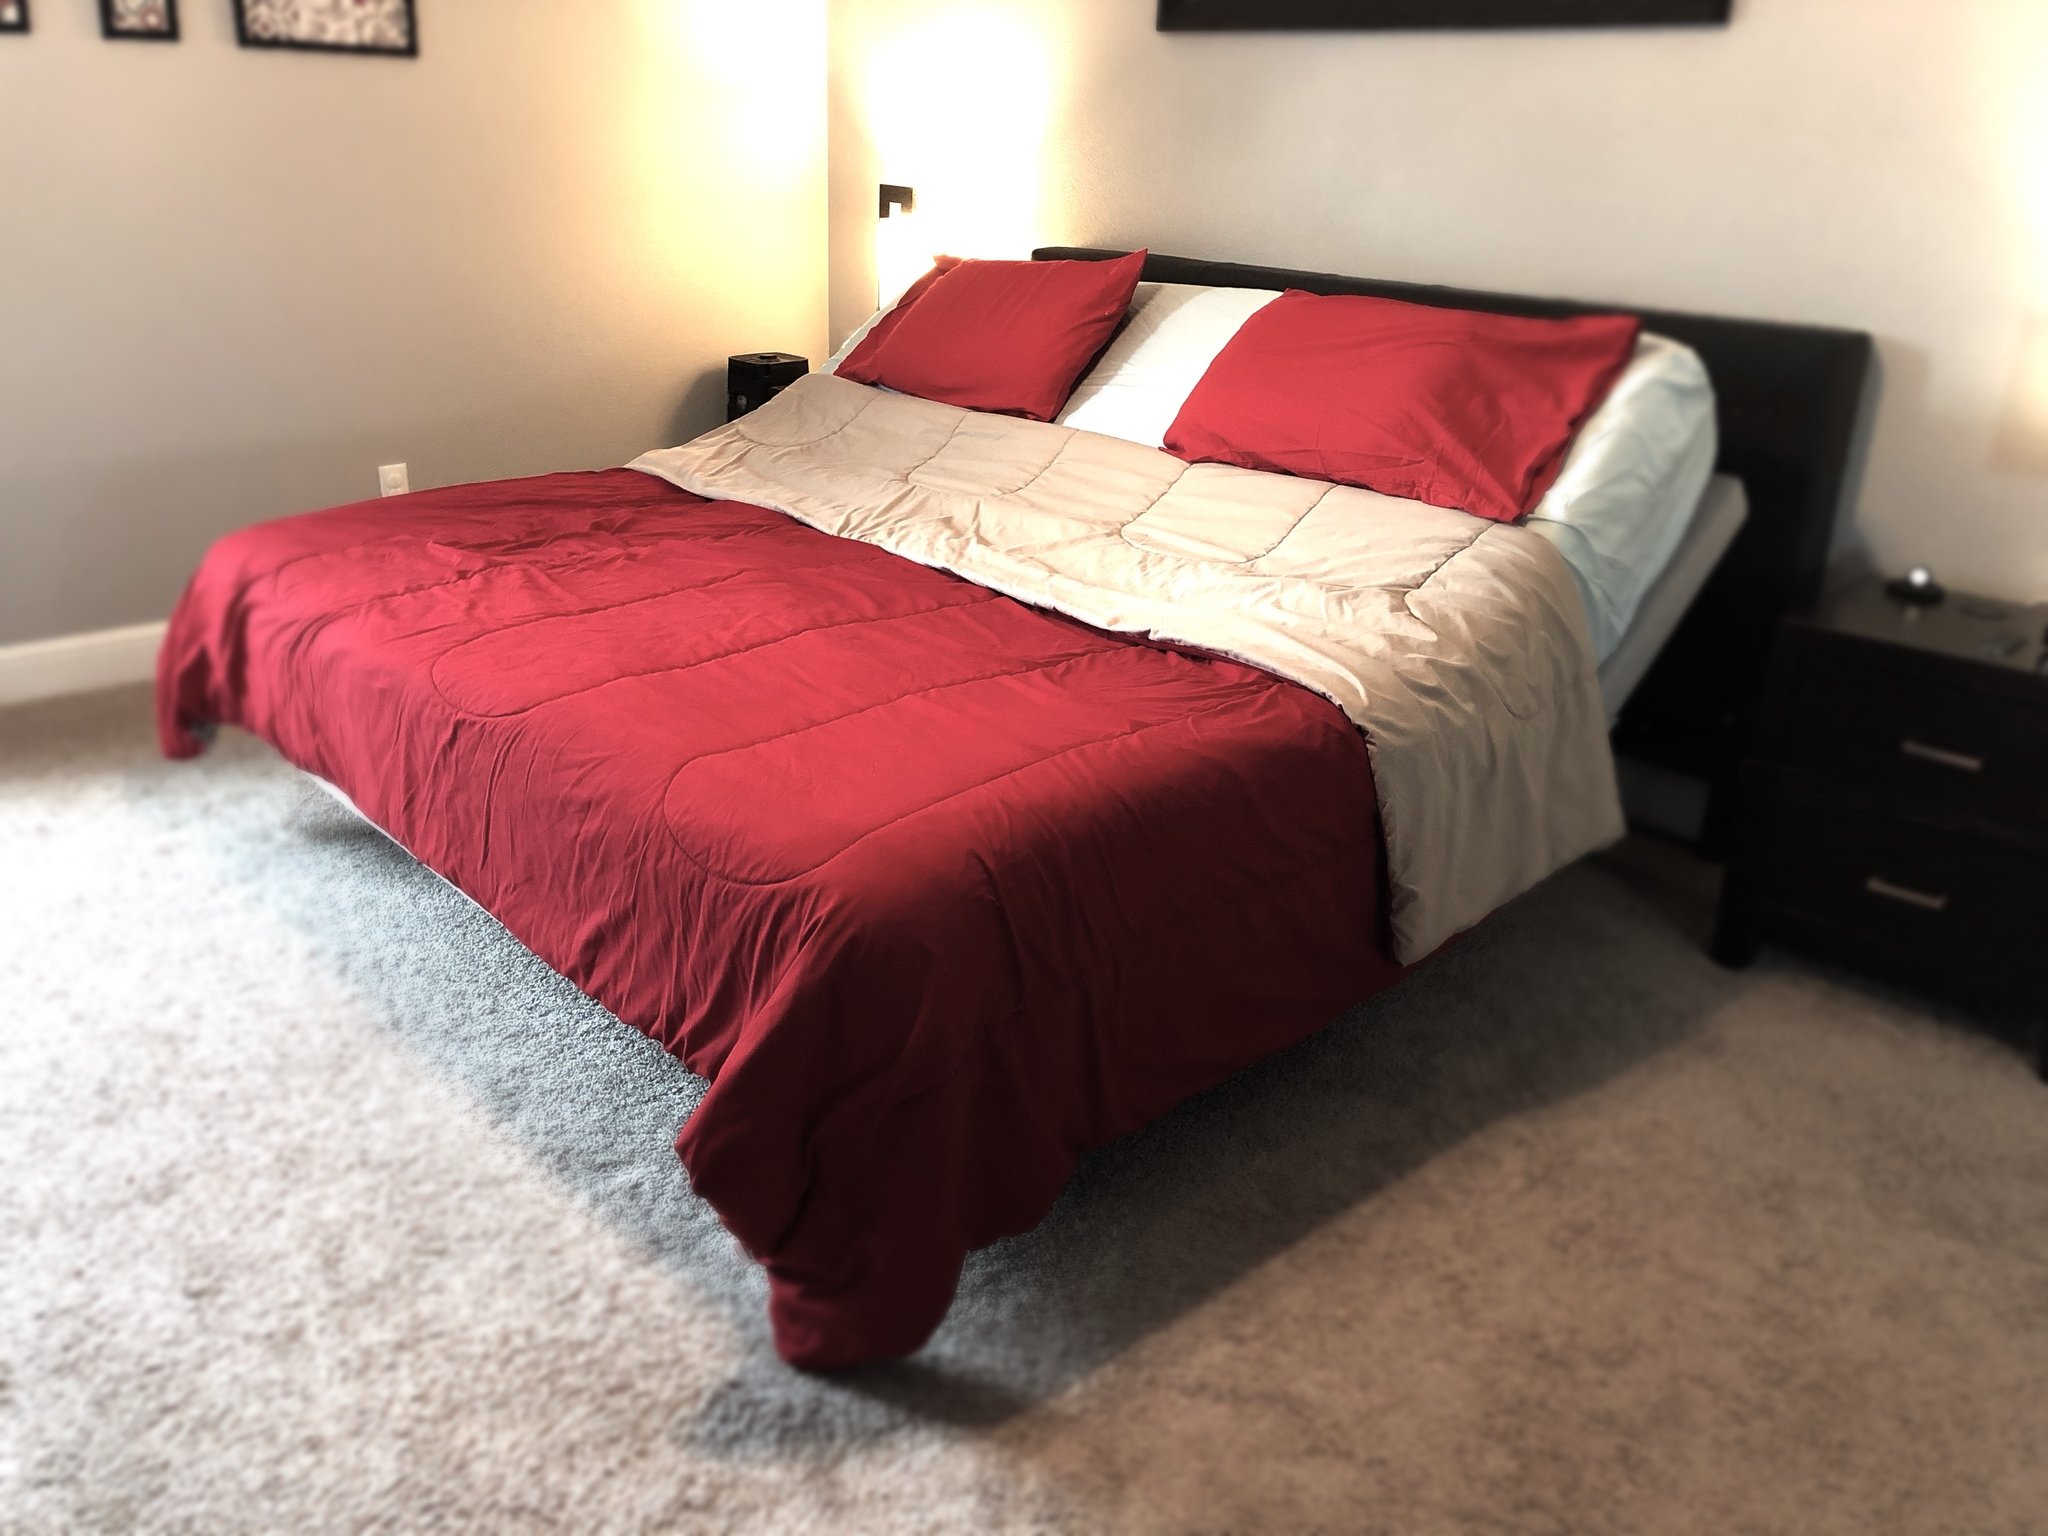 Malouf M555 Adjustable Bed Base Review, How To Put A Headboard On An Adjustable Base